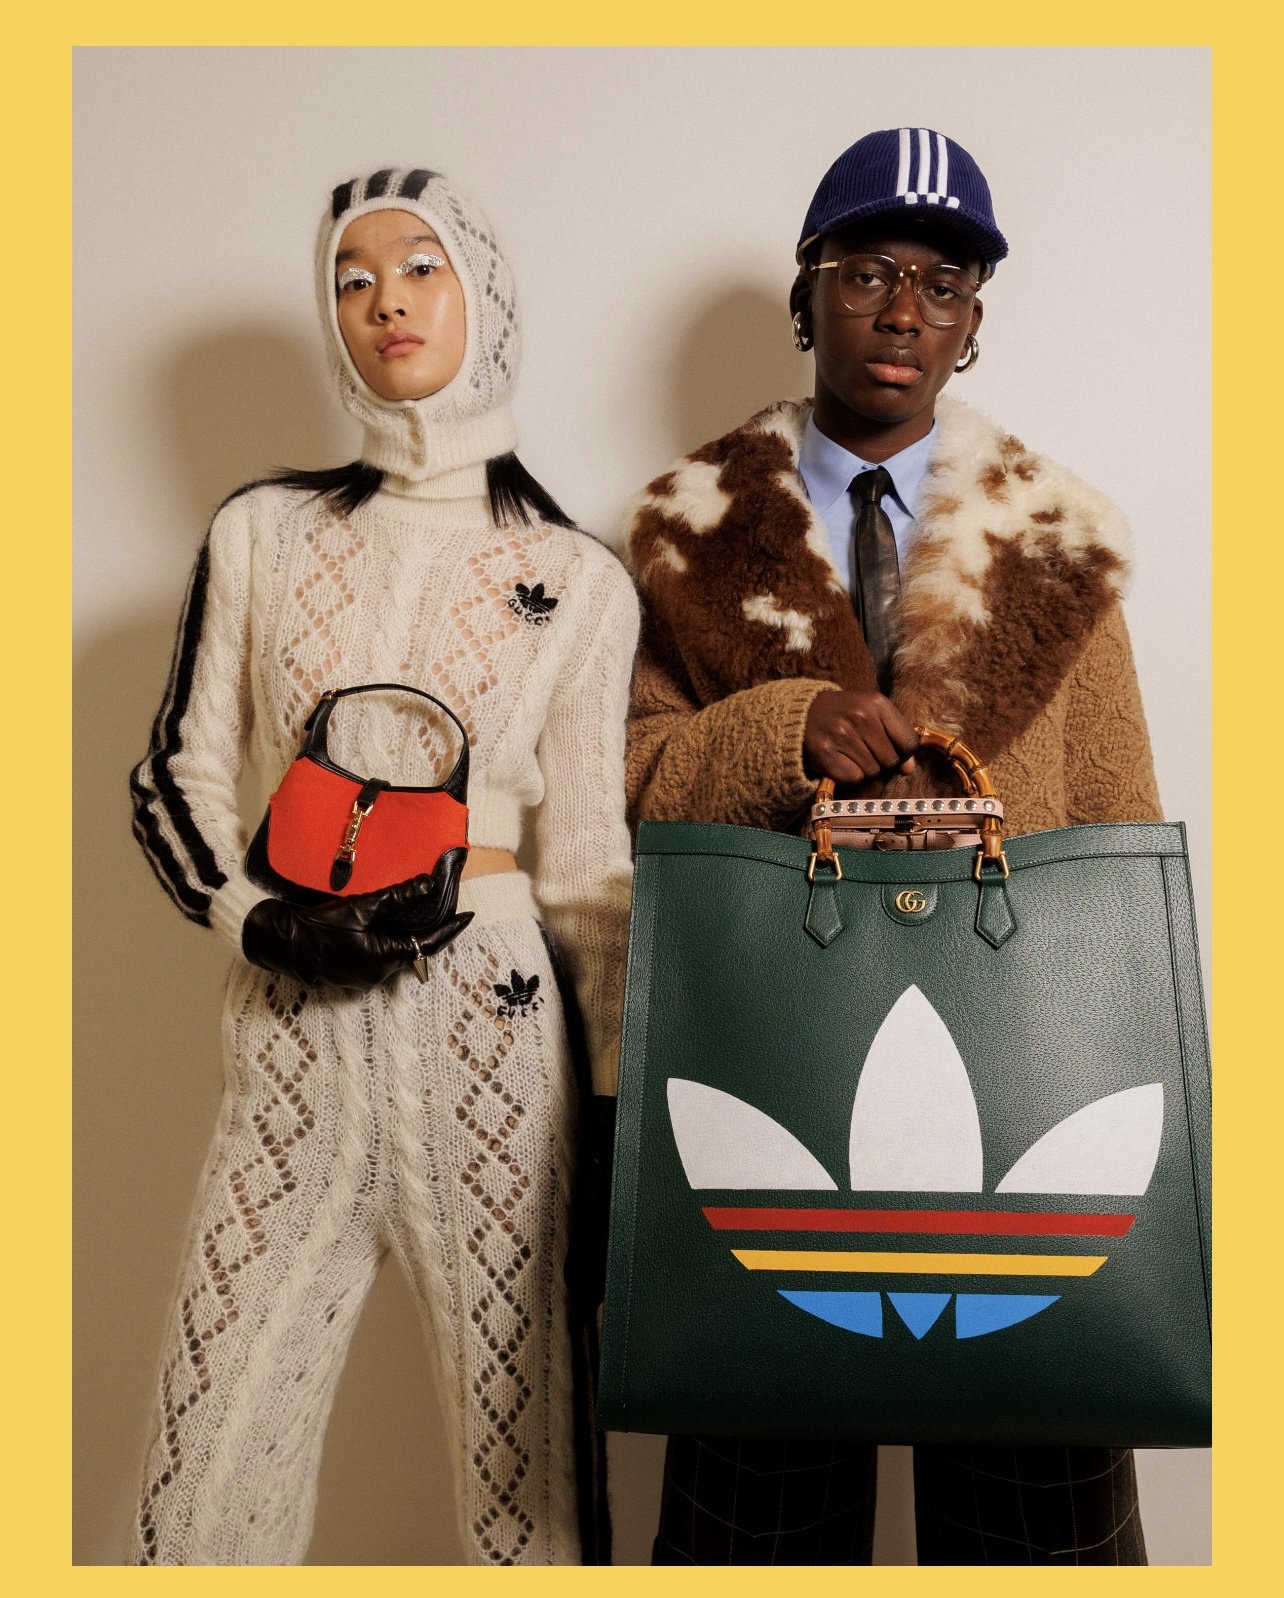 GUCCI X ADIDAS Collaboration 2022 — Collecting Luxury